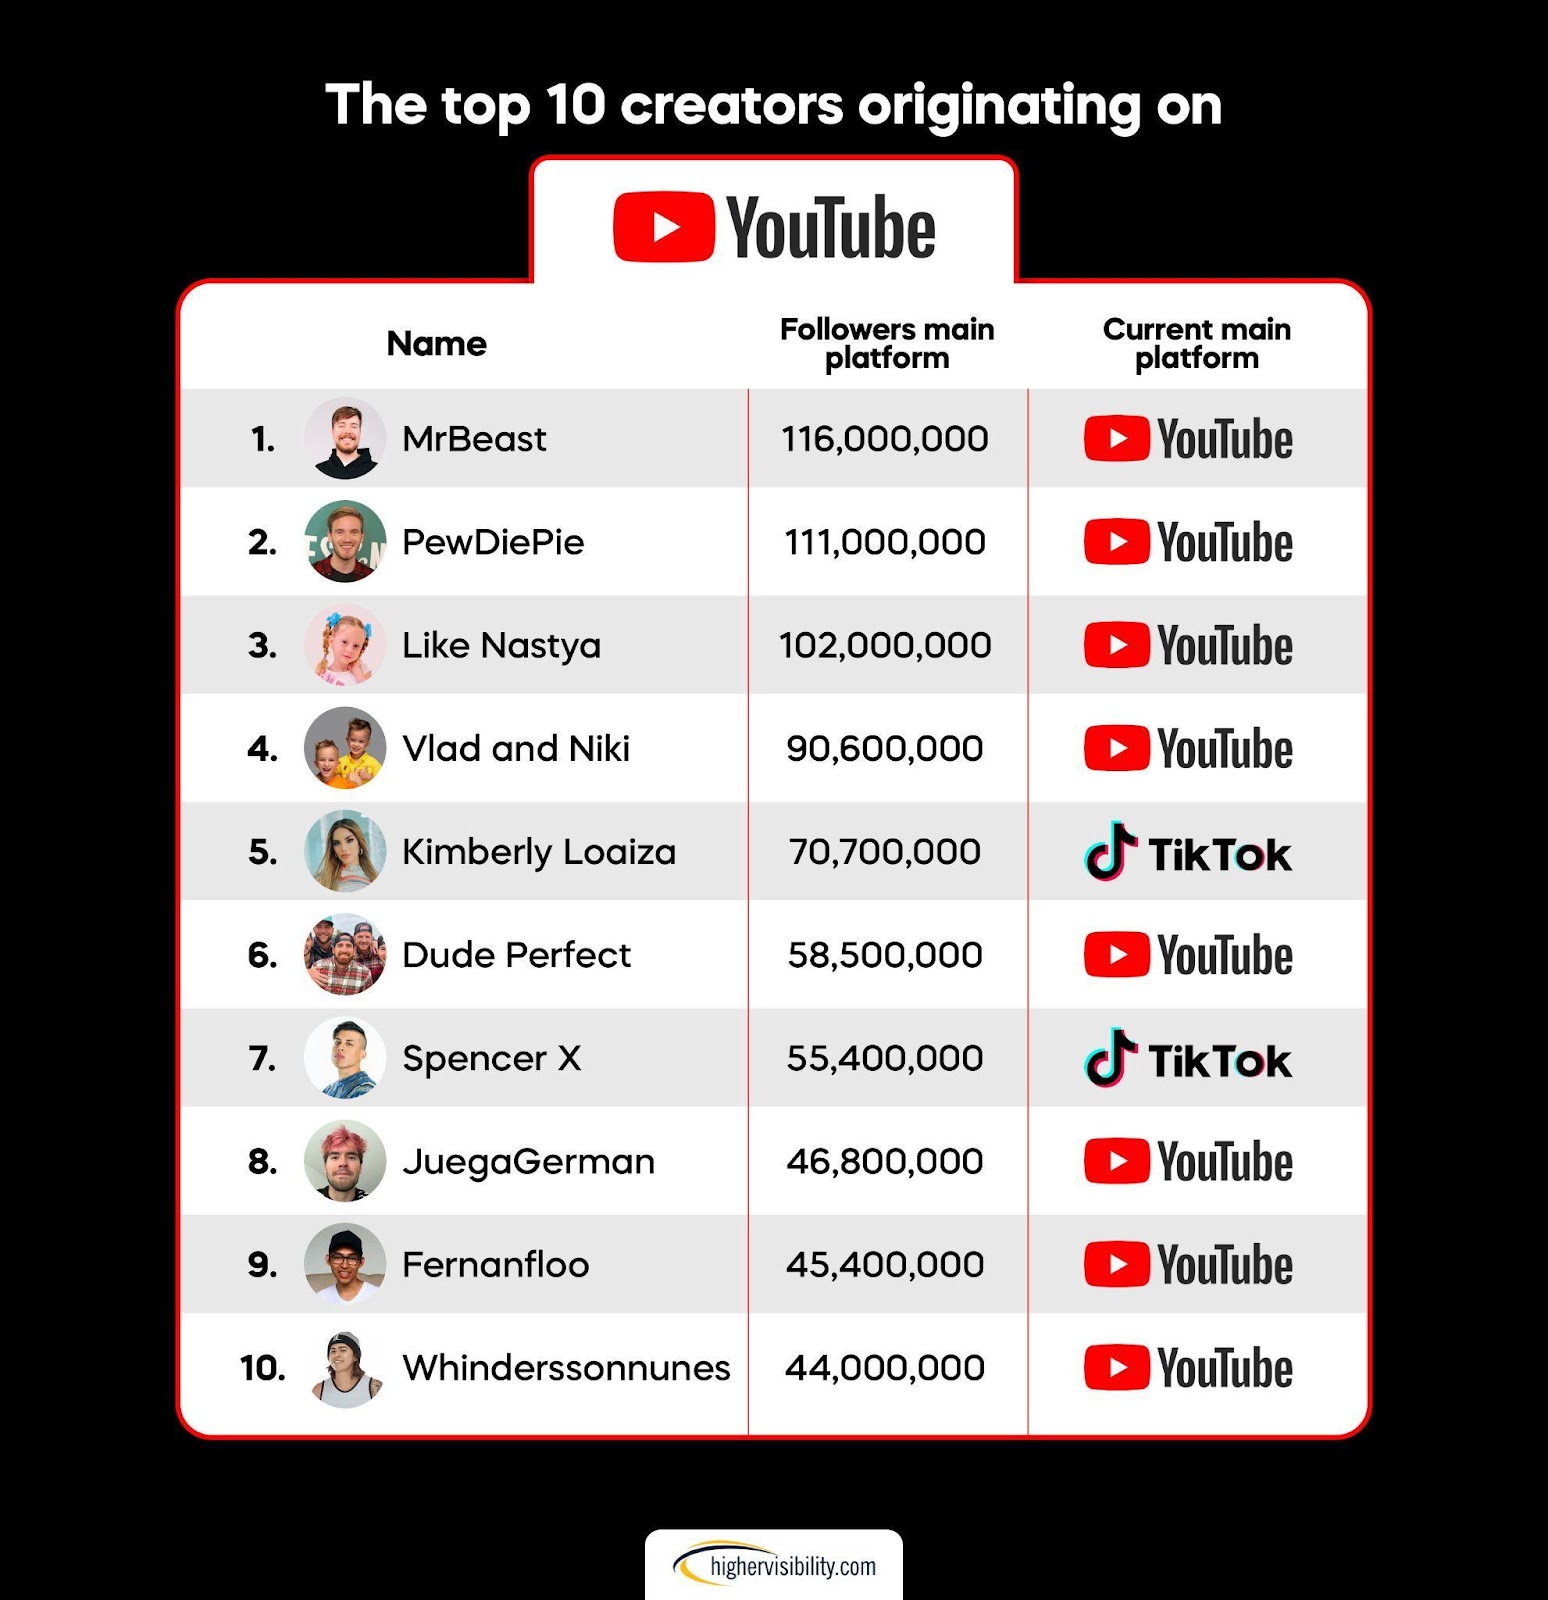 YouTube was among the first mainstream platforms created that enabled users across the world to create online video content, and though many feel that YouTube creator culture is declining, our research finds that it is a platform that attracts long-term, loyal subscribers. However, has the time to create a successful career on YouTube passed if you didn’t build your main audience on the platform, to begin with? Though some have moved to TikTok, the majority of full-time creators on YouTube have found less success on alternate platforms.